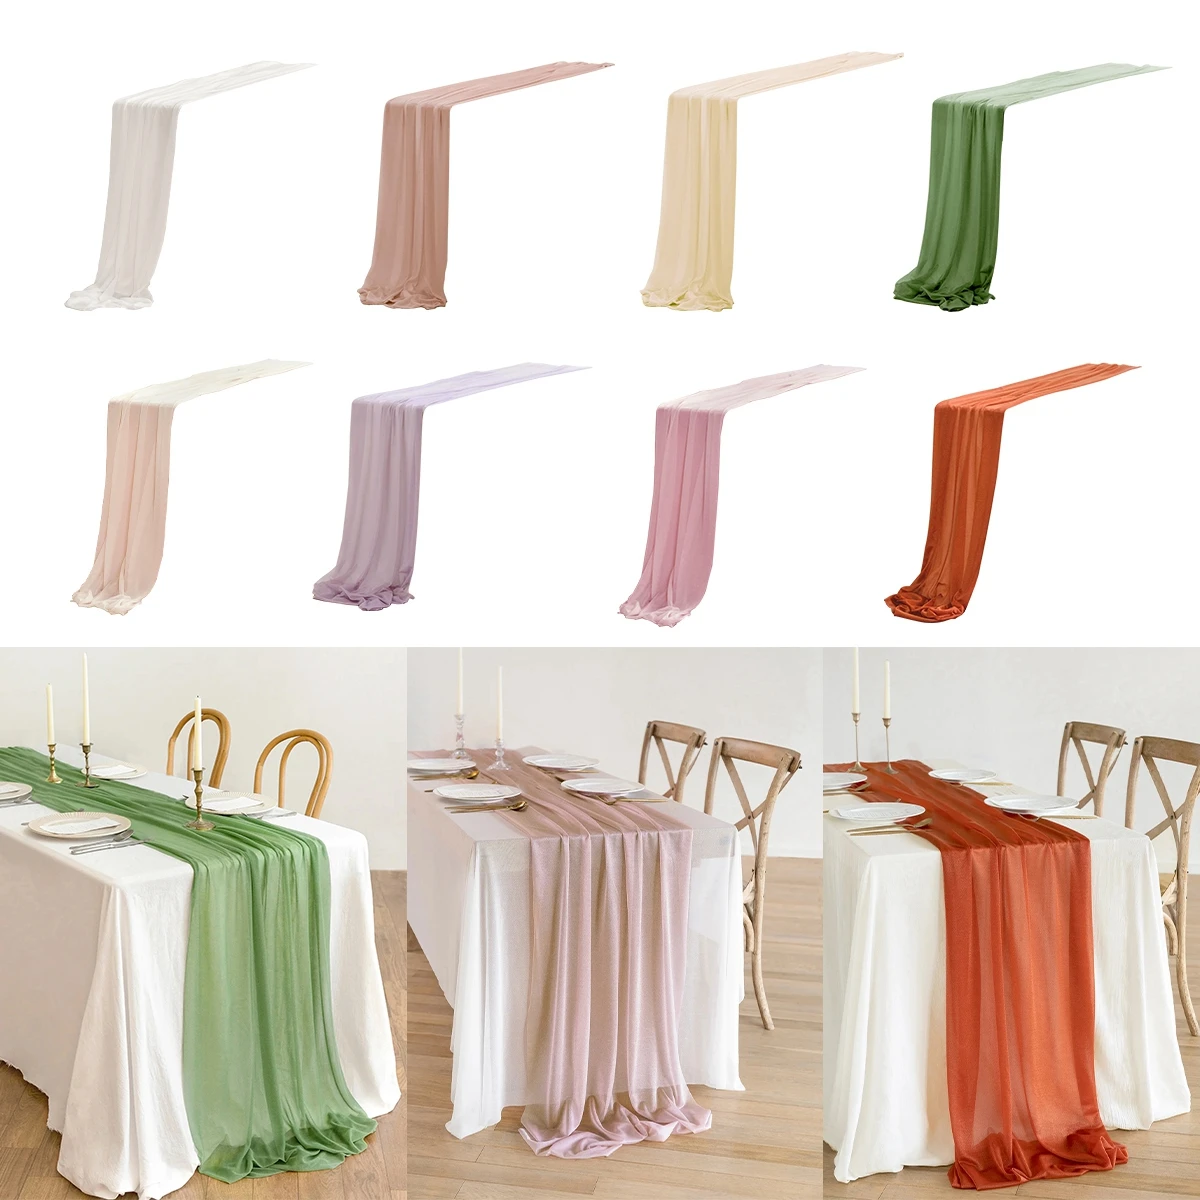 

180cm Chiffon Table Runner Dining Table Decoration Cotton Gauze Table Runner Romantic Boho Tablecloth for Wedding Party Decor